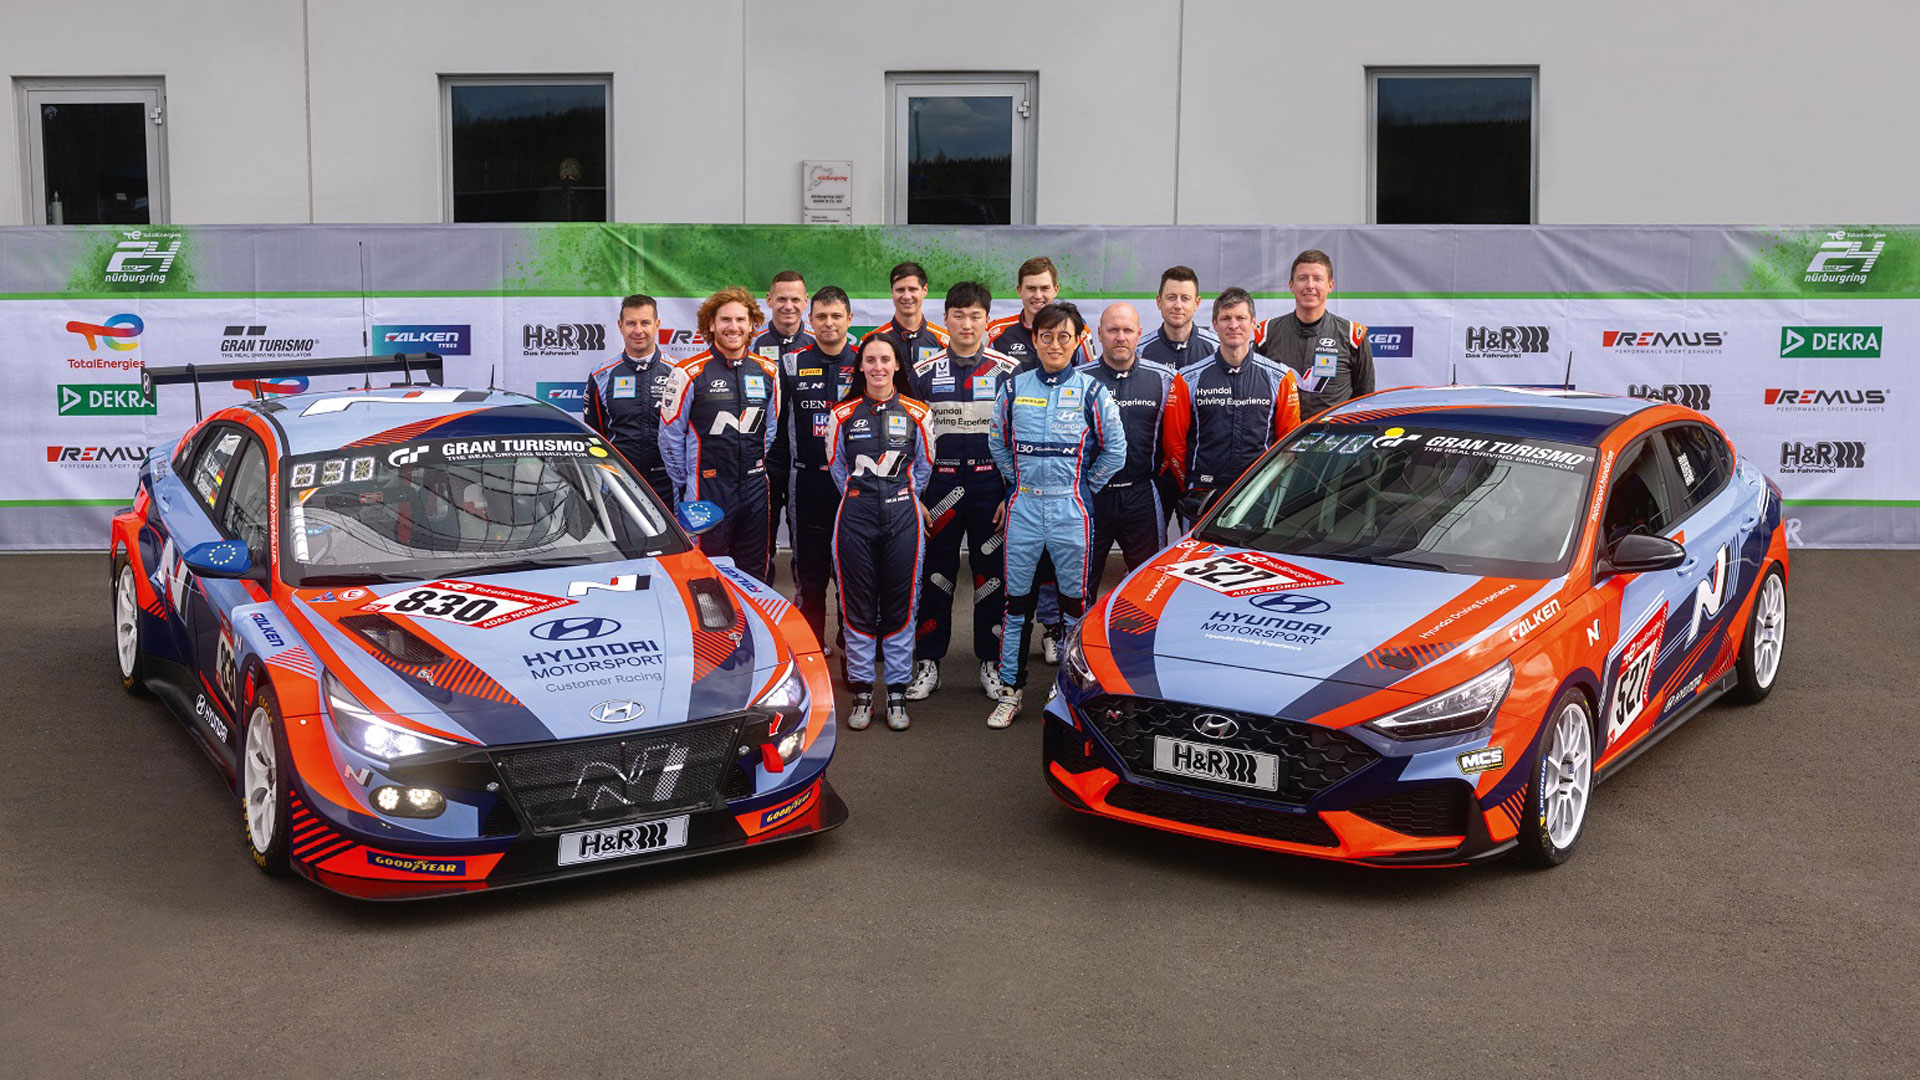 Hyundai Motor Aiming for Third Straight Win in Nürburgring 24 Hours Endurance Race